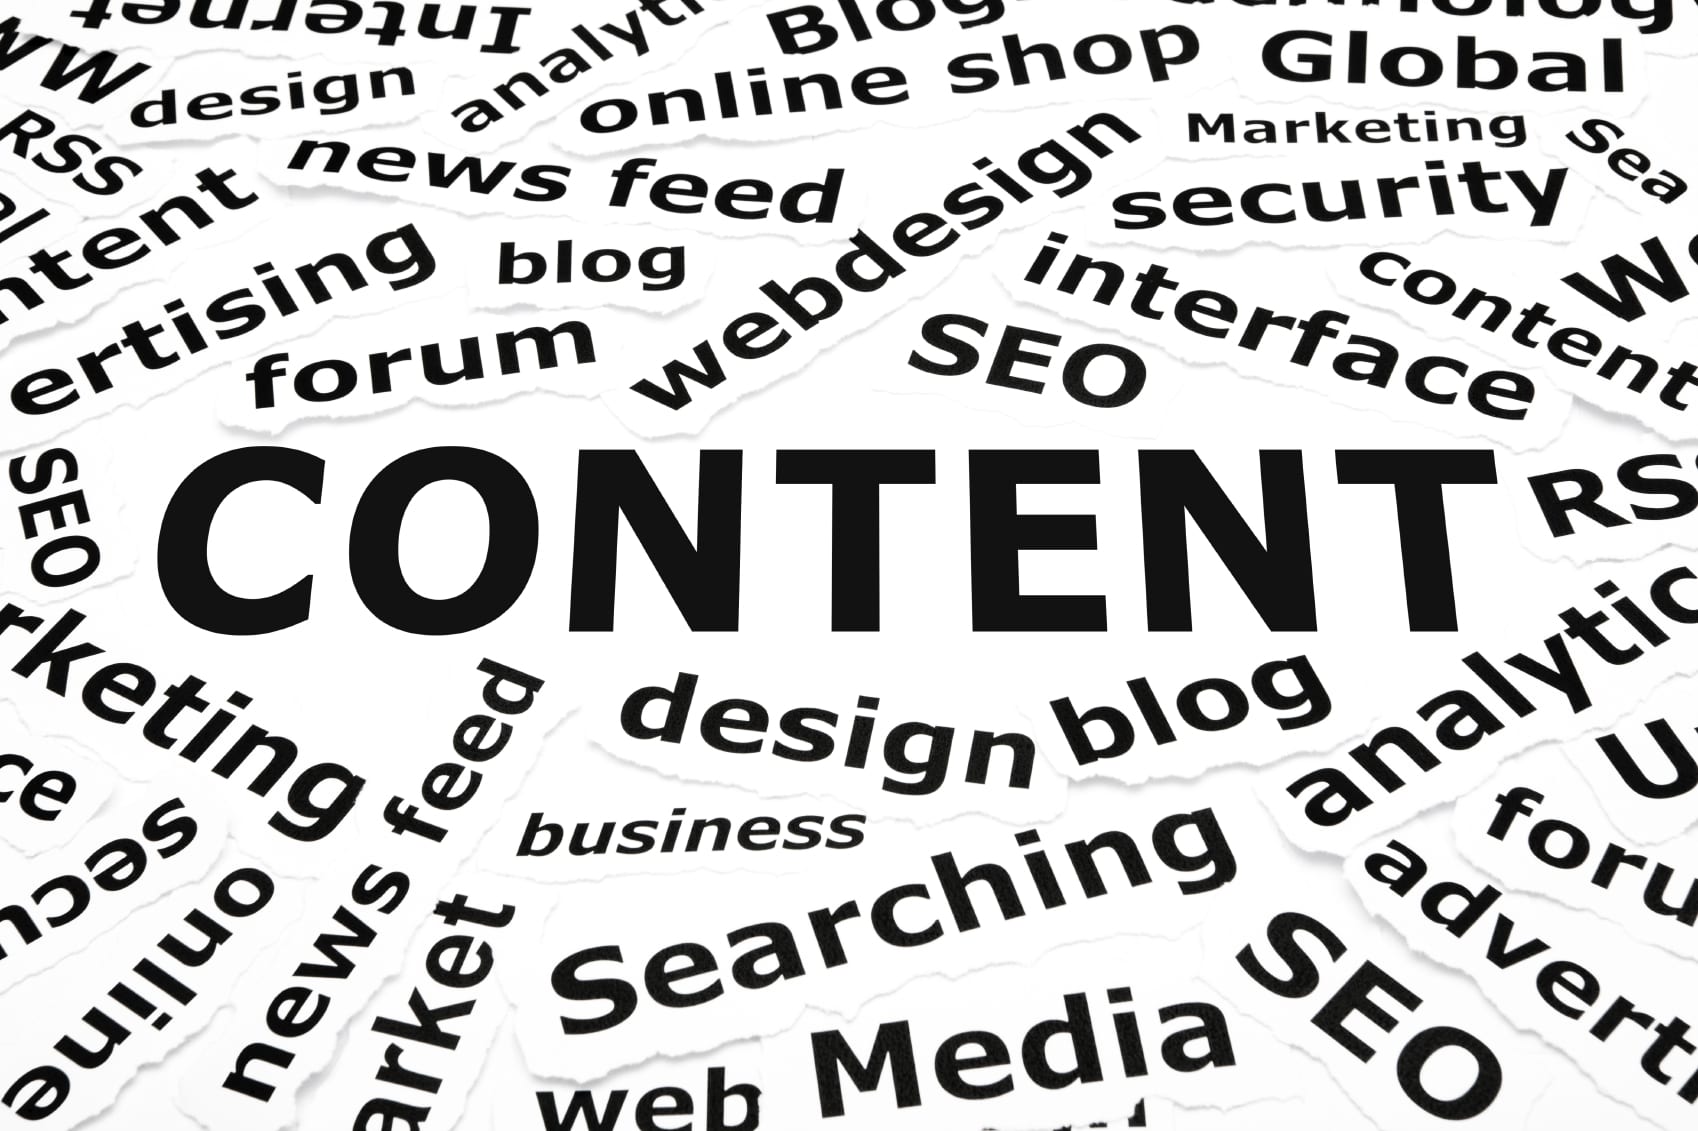 How to Optimize Content on Your Small Business Website